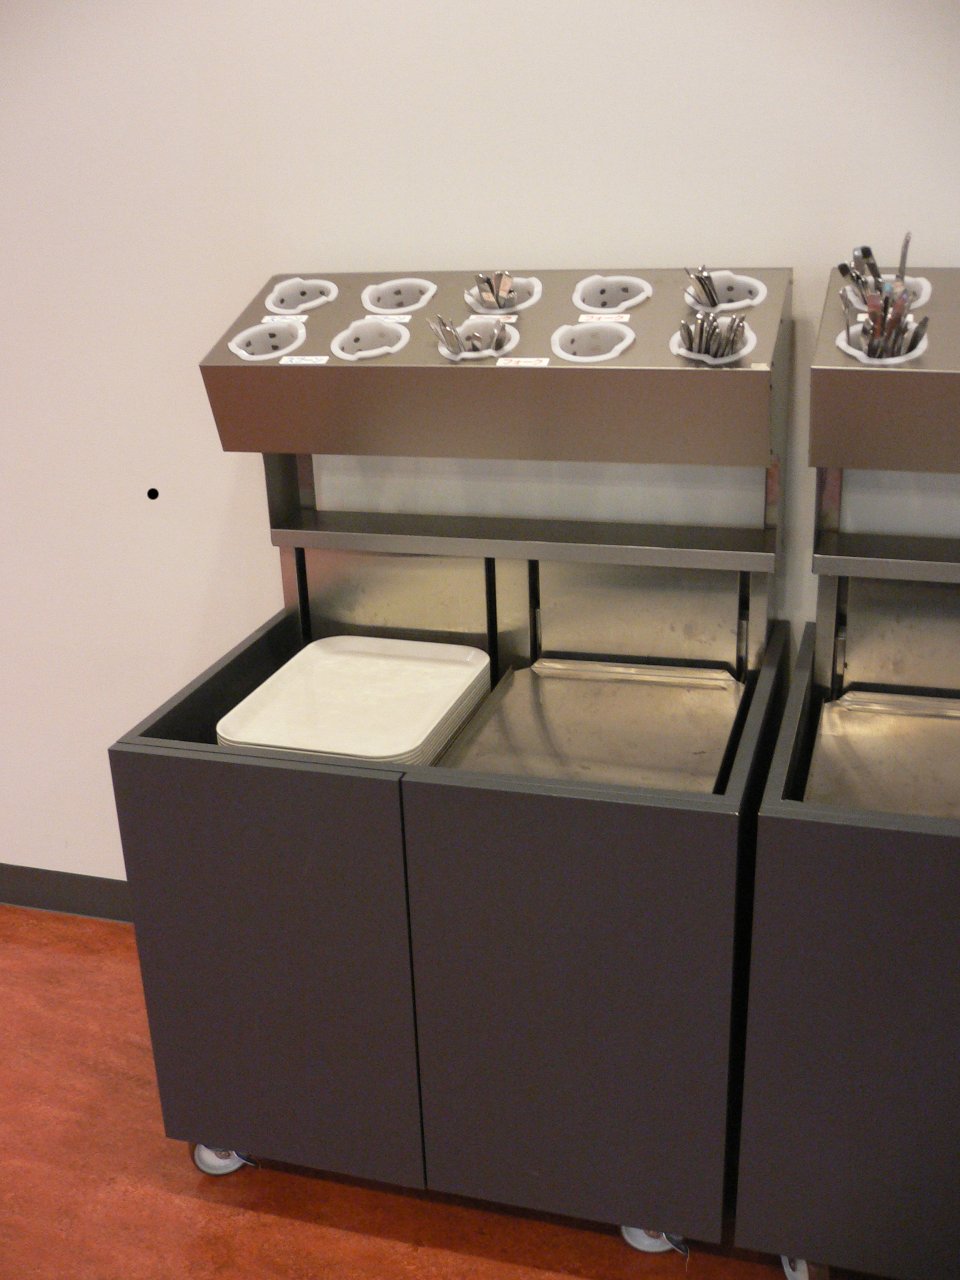 A stack of trays at the cafeteria. Only the topmost tray is visible due to a built-in spring.